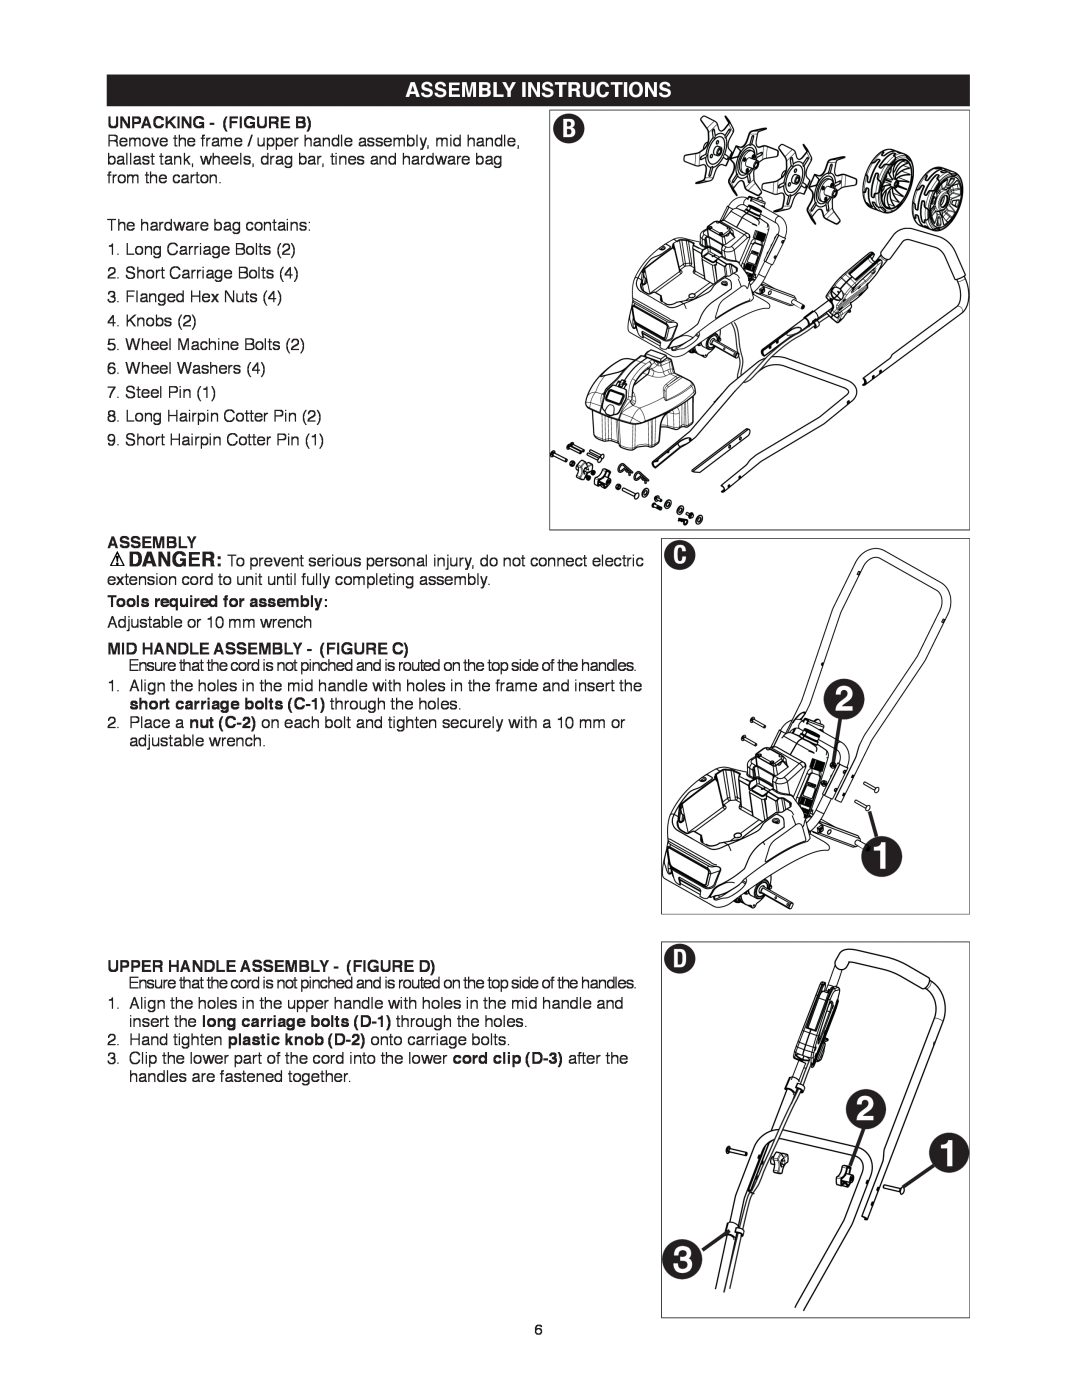 Black & Decker TL10 instruction manual Assembly Instructions, Unpacking - Figure B, Tools required for assembly 